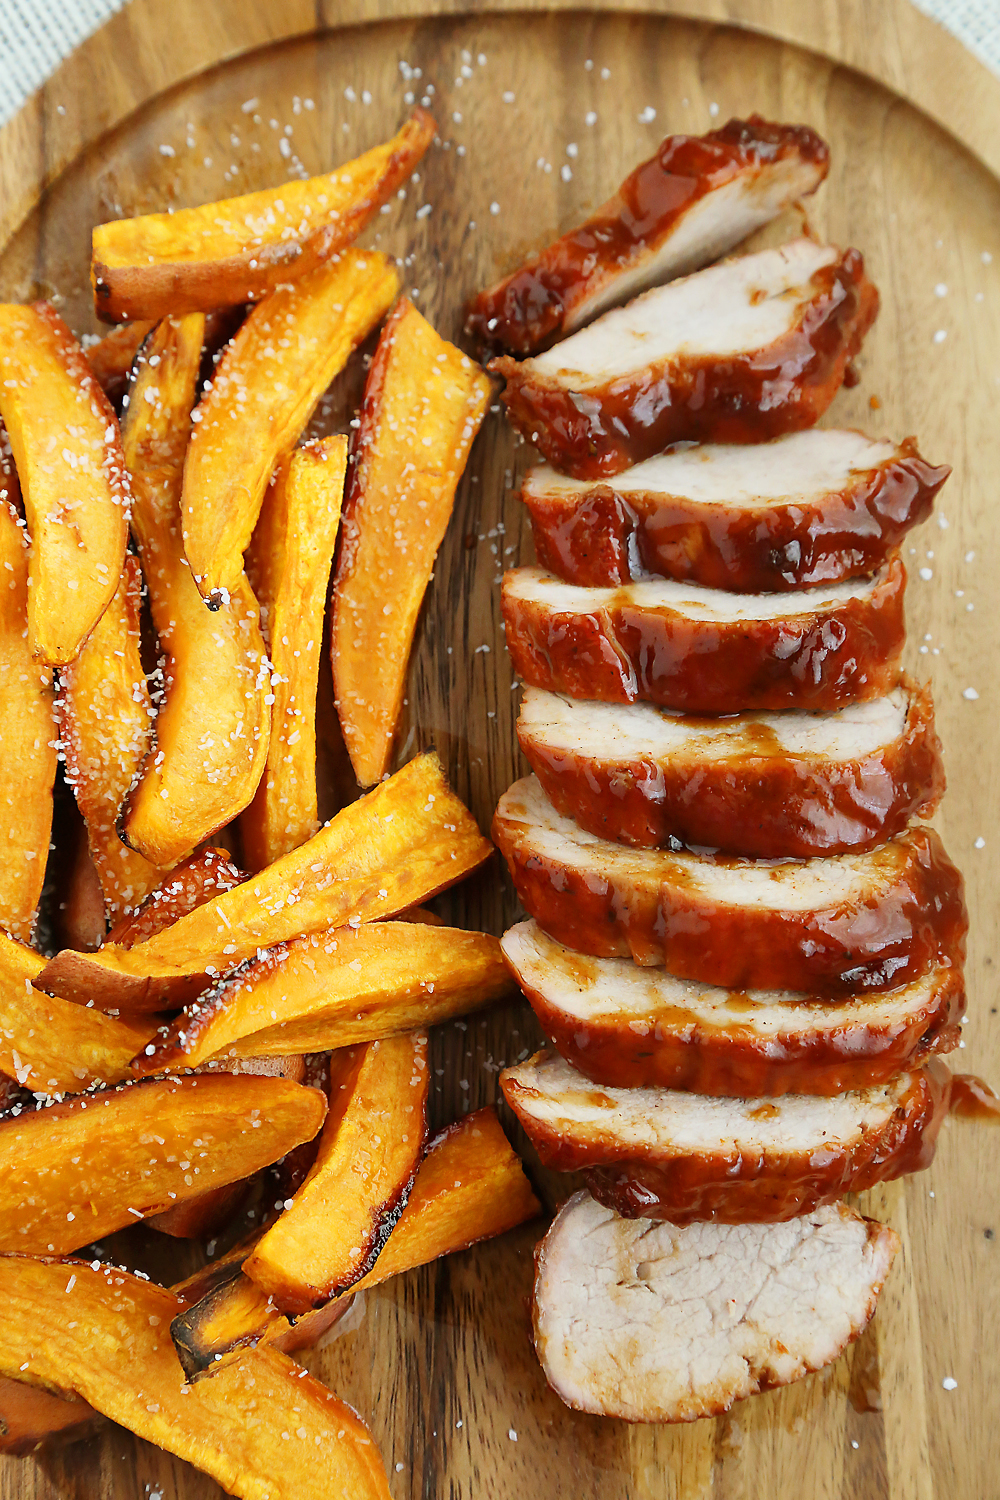 BBQ Pork Tenderloin with Sweet Potato Fries – Try this 5-ingredient one-pan weeknight dinner! So quick, easy and delicious! Thecomfortofcooking.com